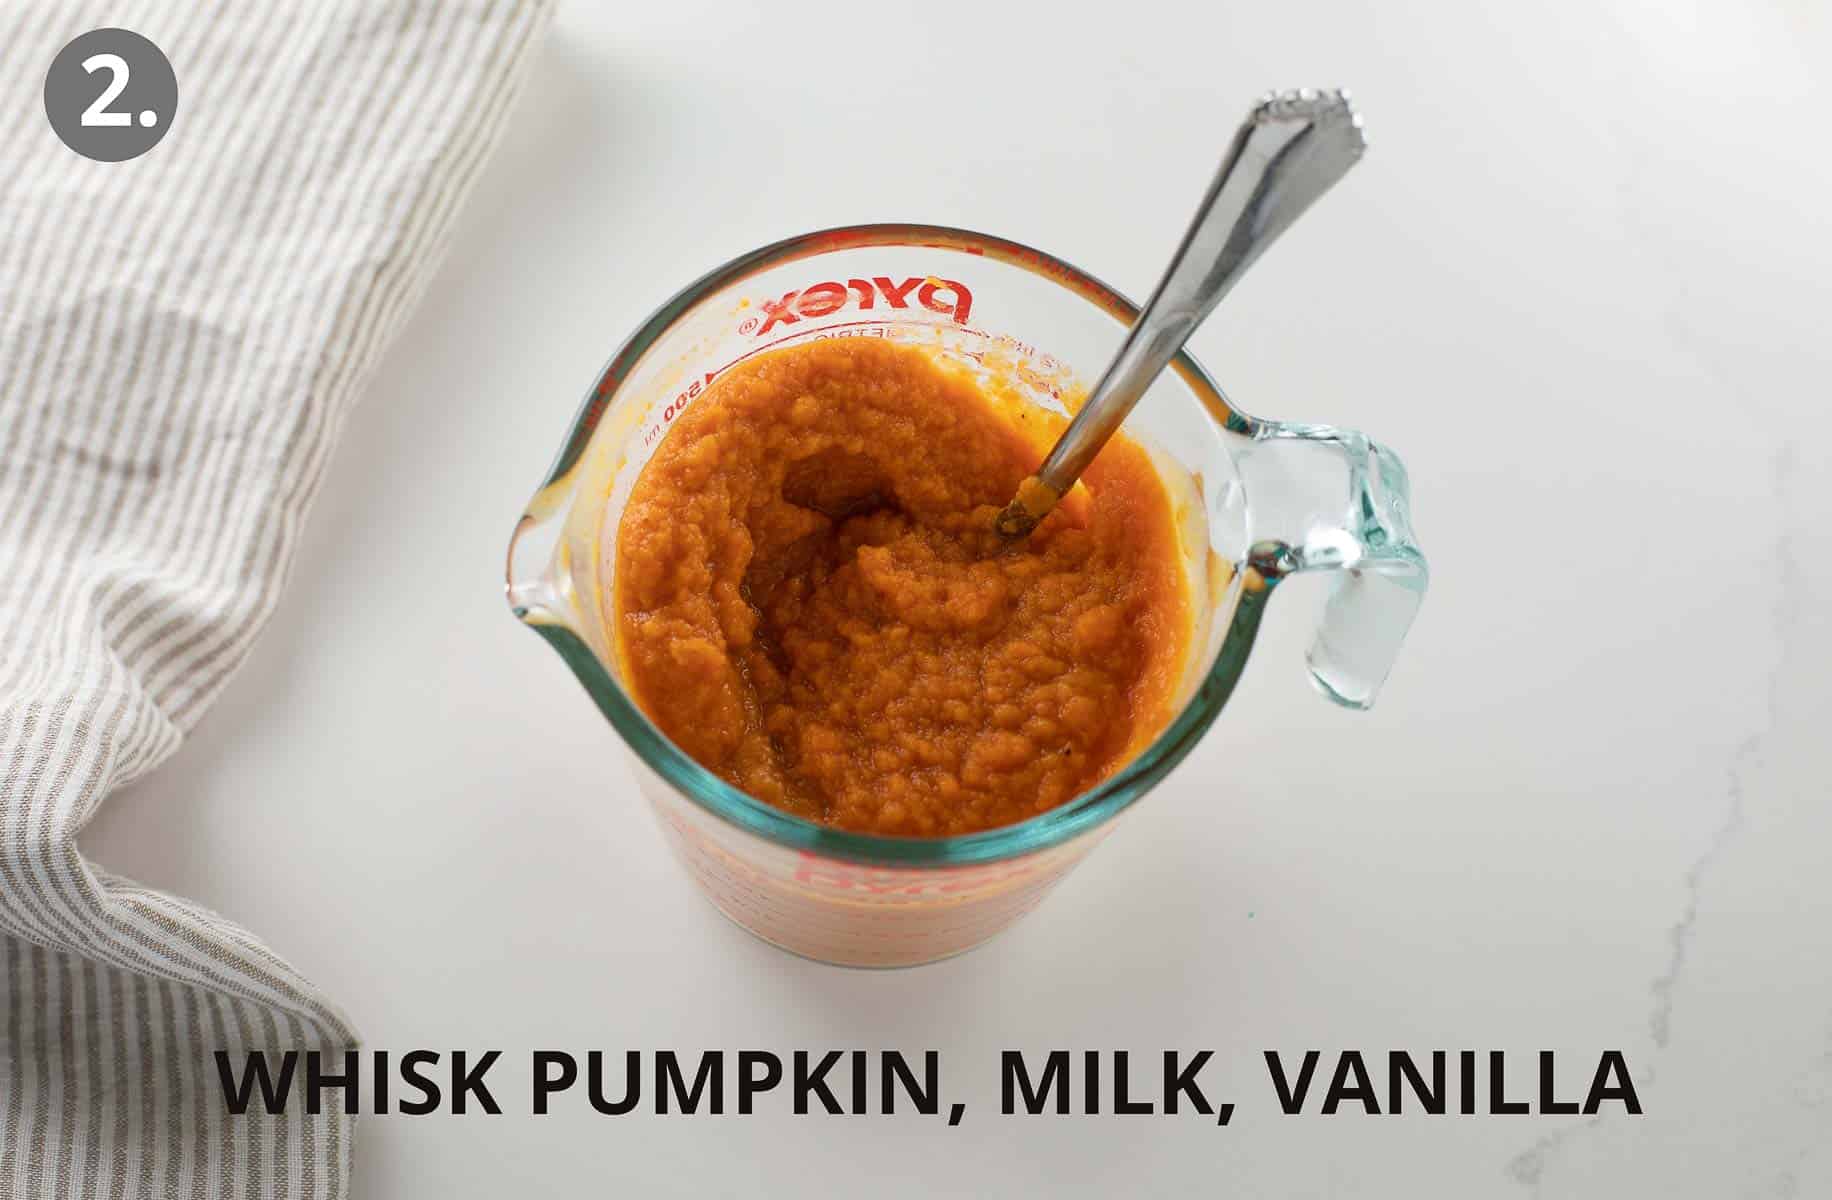 pumpkin and wet ingredients mixed together in glass measuring cup